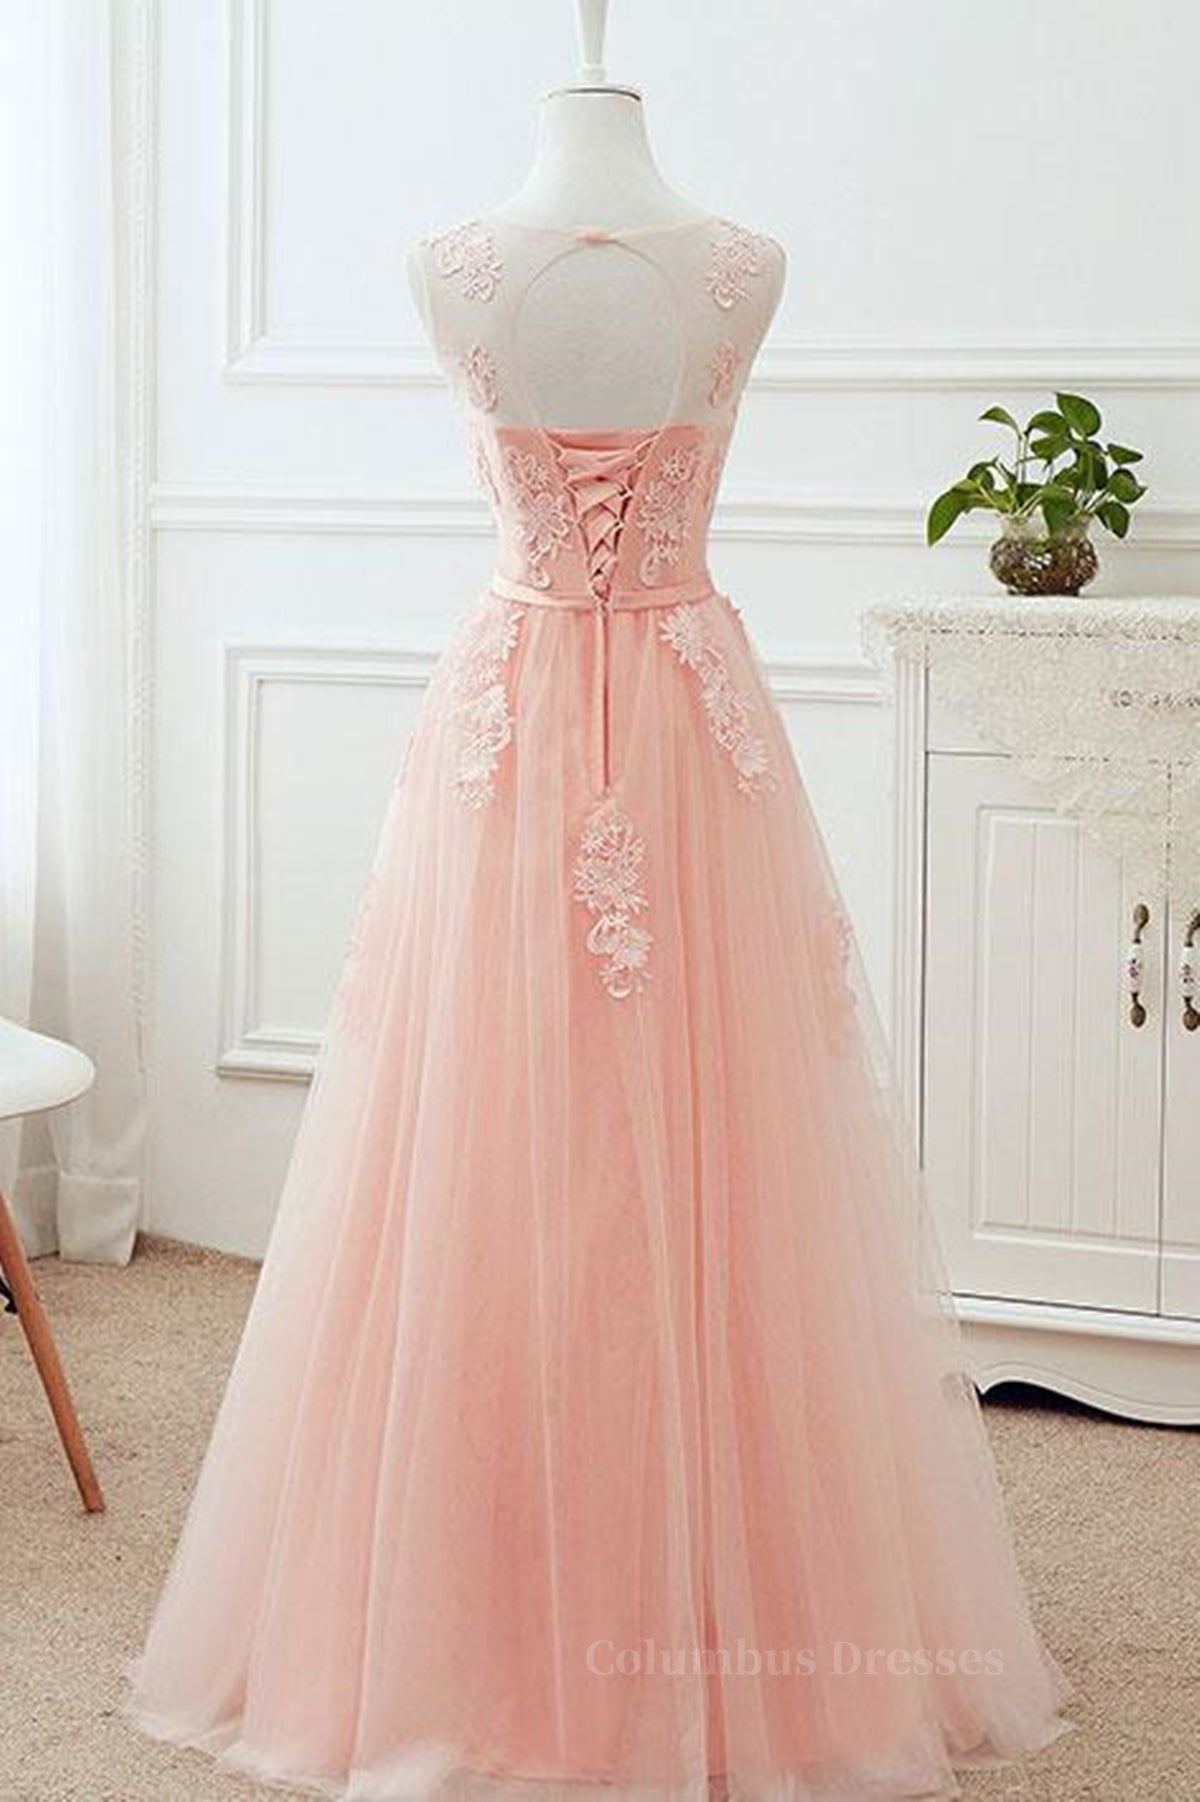 Fall Wedding Ideas, Round Neck Pink Lace Long Prom Dresses, Pink Lace Bridesmaid Dresses